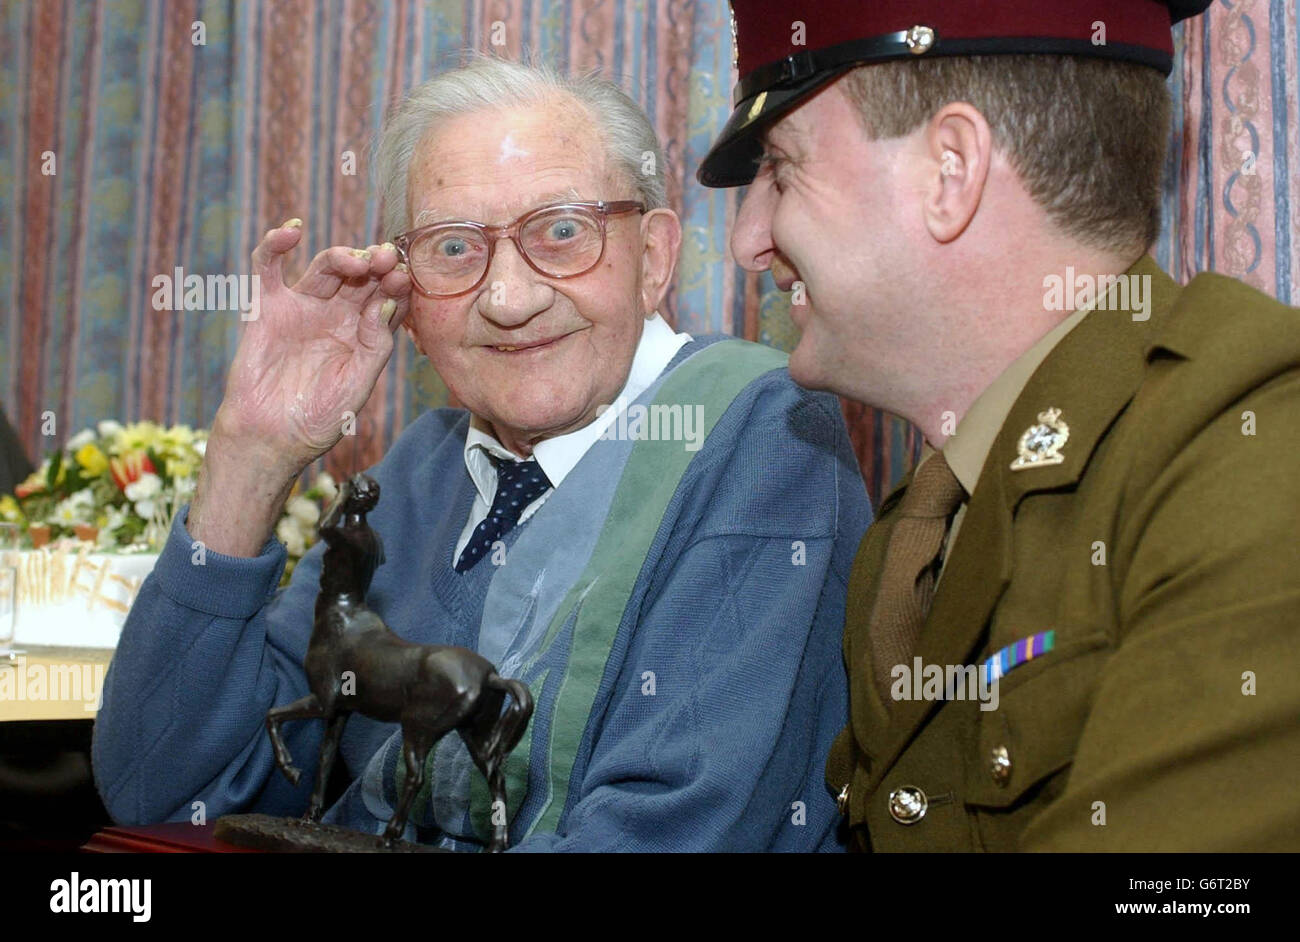 Former member of the Royal Army Veterinary Corps Frederick Charles Lloyd, salutes his modern day counterpart, Sergeant Major Paul Williams, as he is presented with a bronze centaur (the Corps emblem) during a party to celebrate his 106th birthday at Uckfield Civic Centre, East Sussex. One of the last surviving combatants of the First World War - thought now to number 26 - Fred saw service on the Western Front. Stock Photo